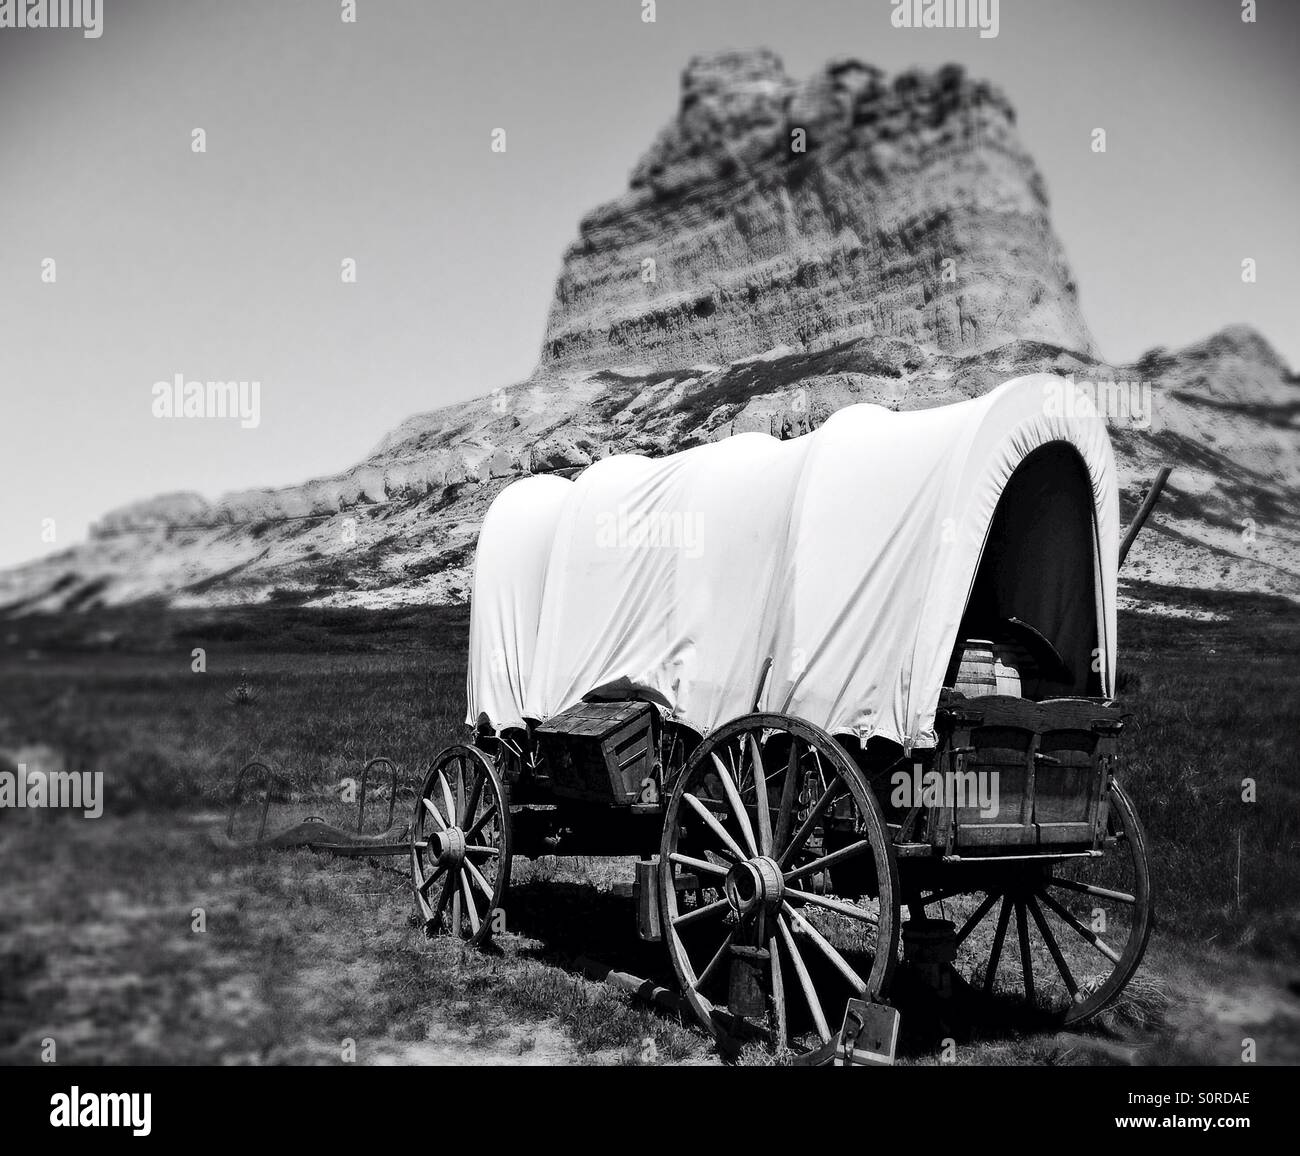 A covered wagon in front of Eagle rock at Scotts Bluff national monument in Nebraska. Stock Photo